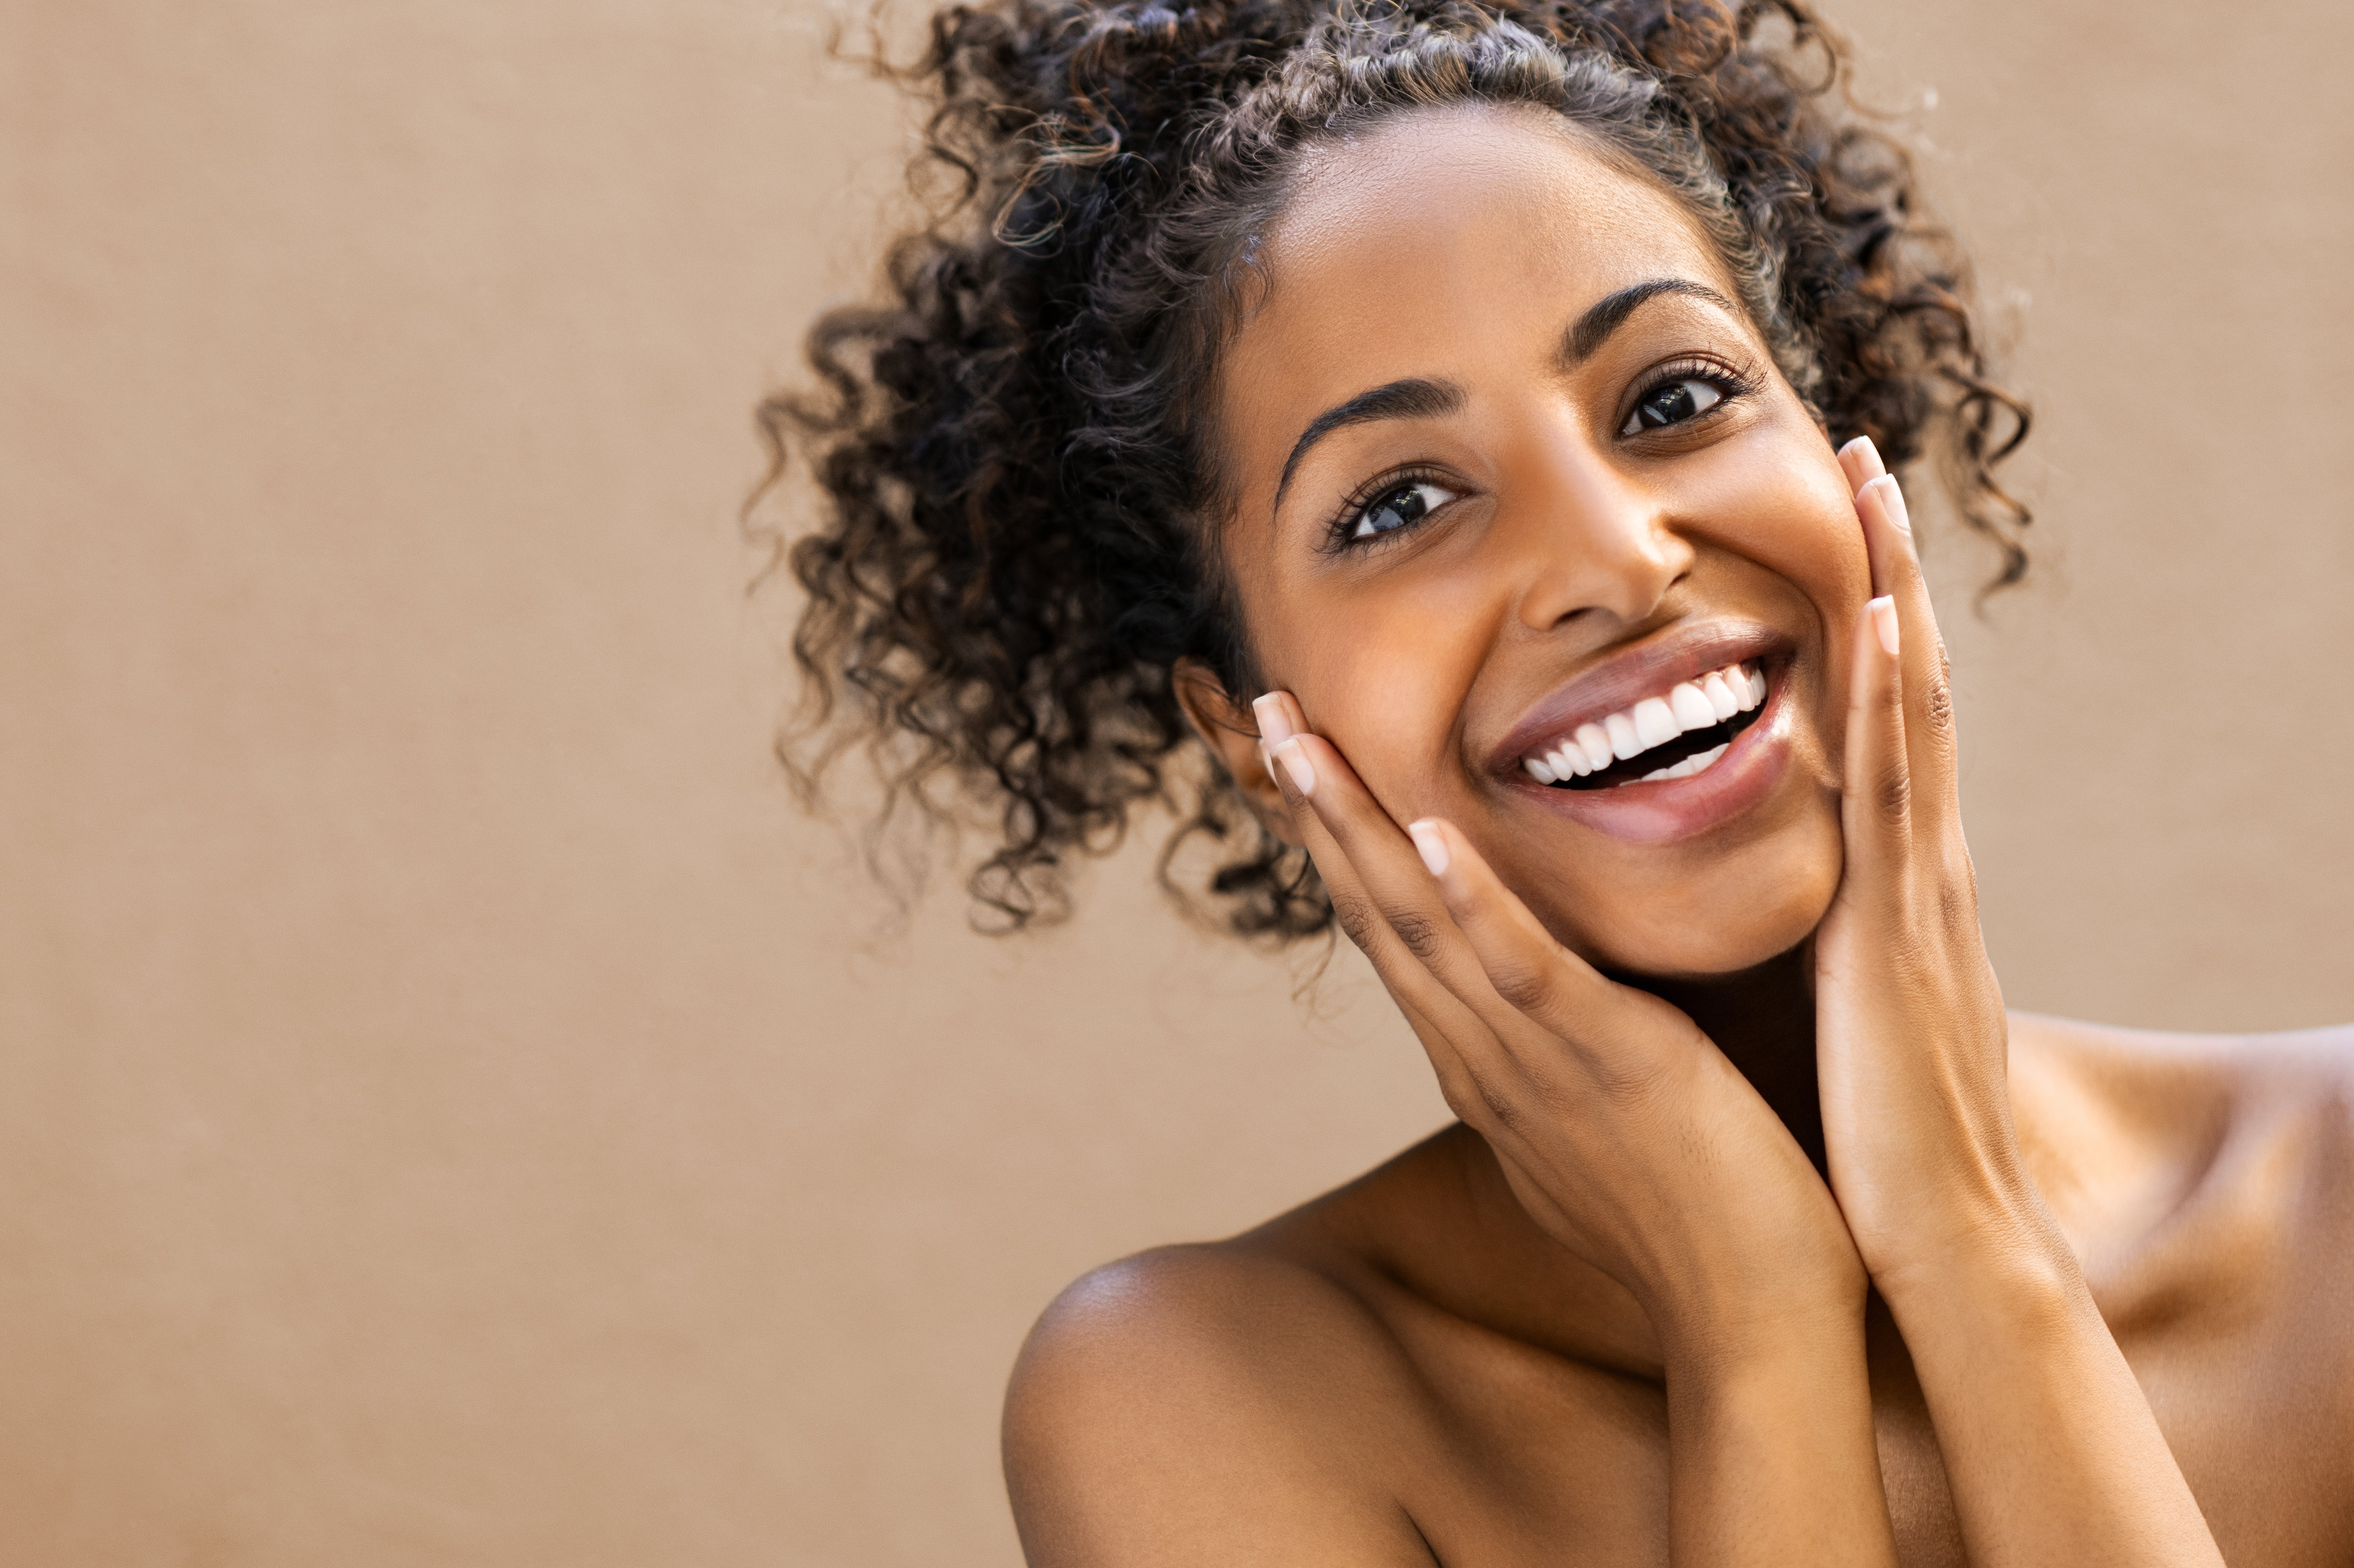 Woman with clear skin | Shutterstock